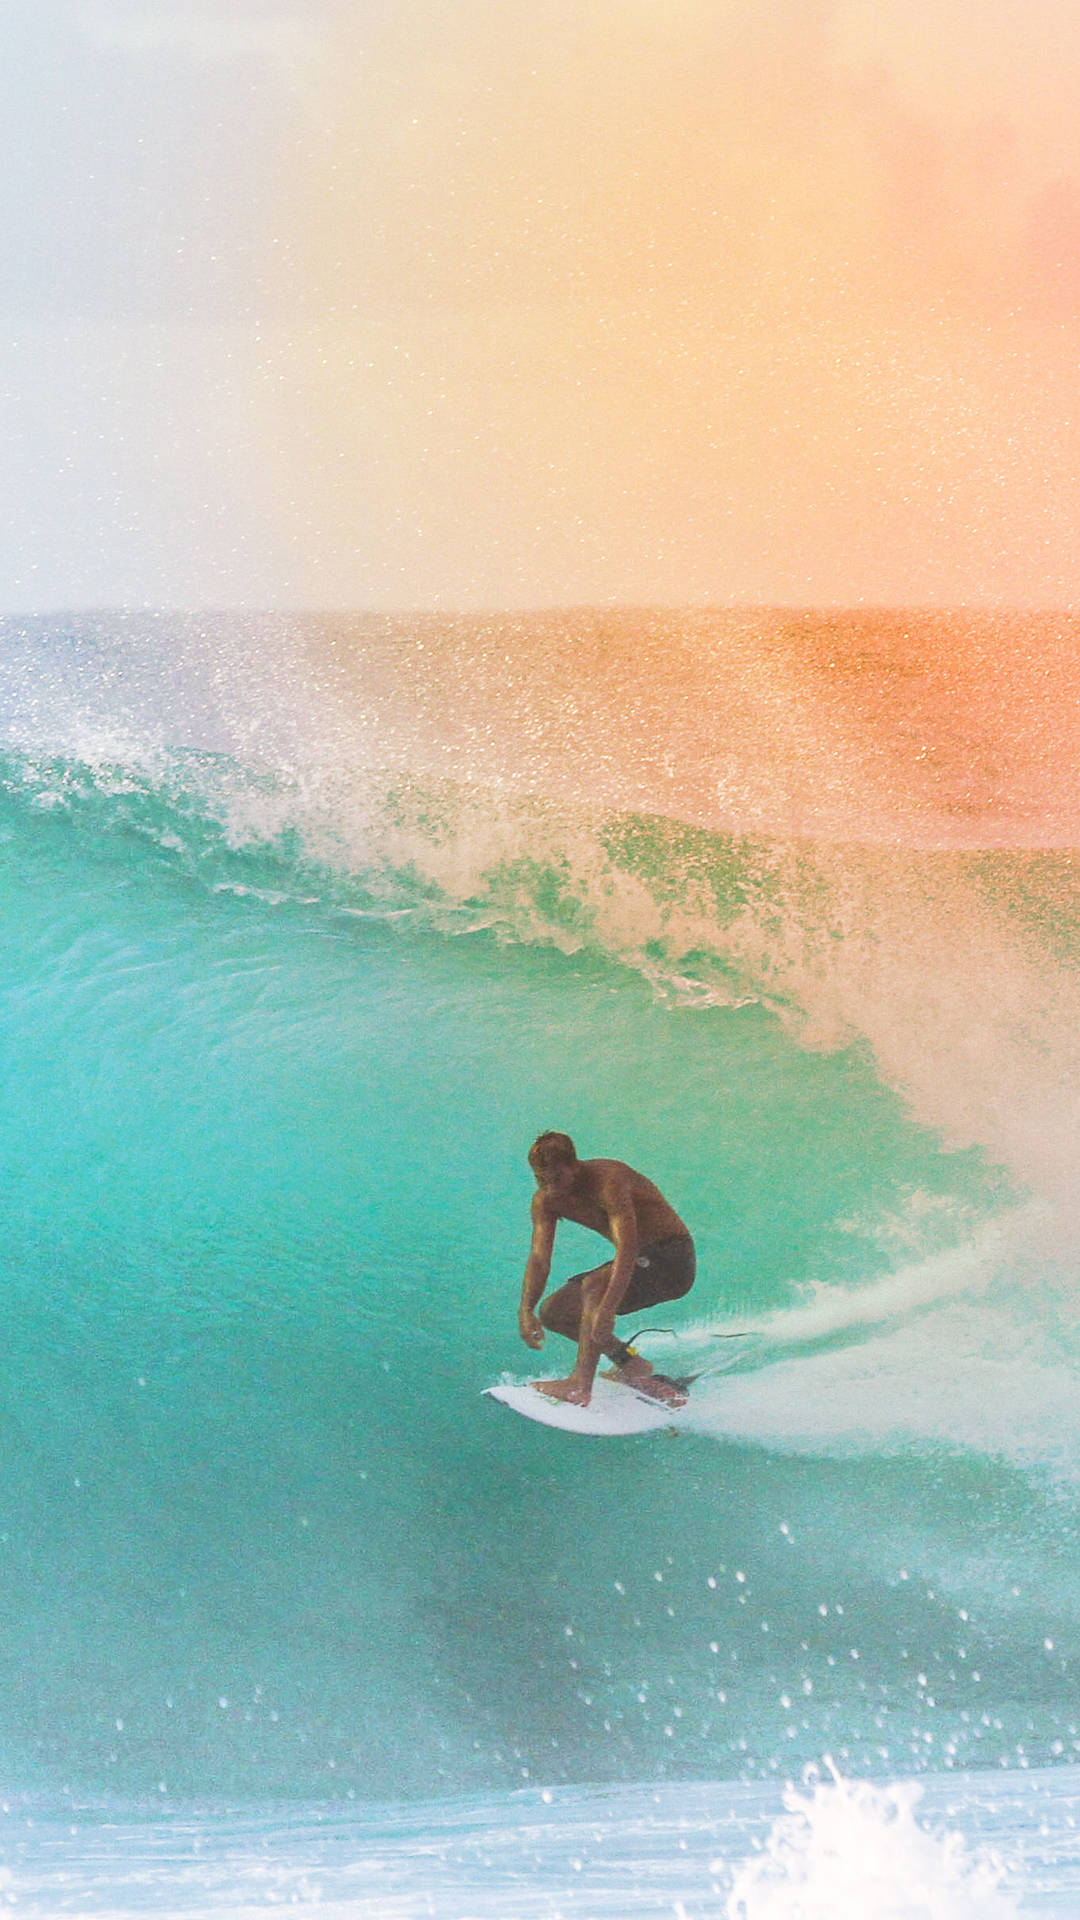 Surfing Orange And Blue Hues Background